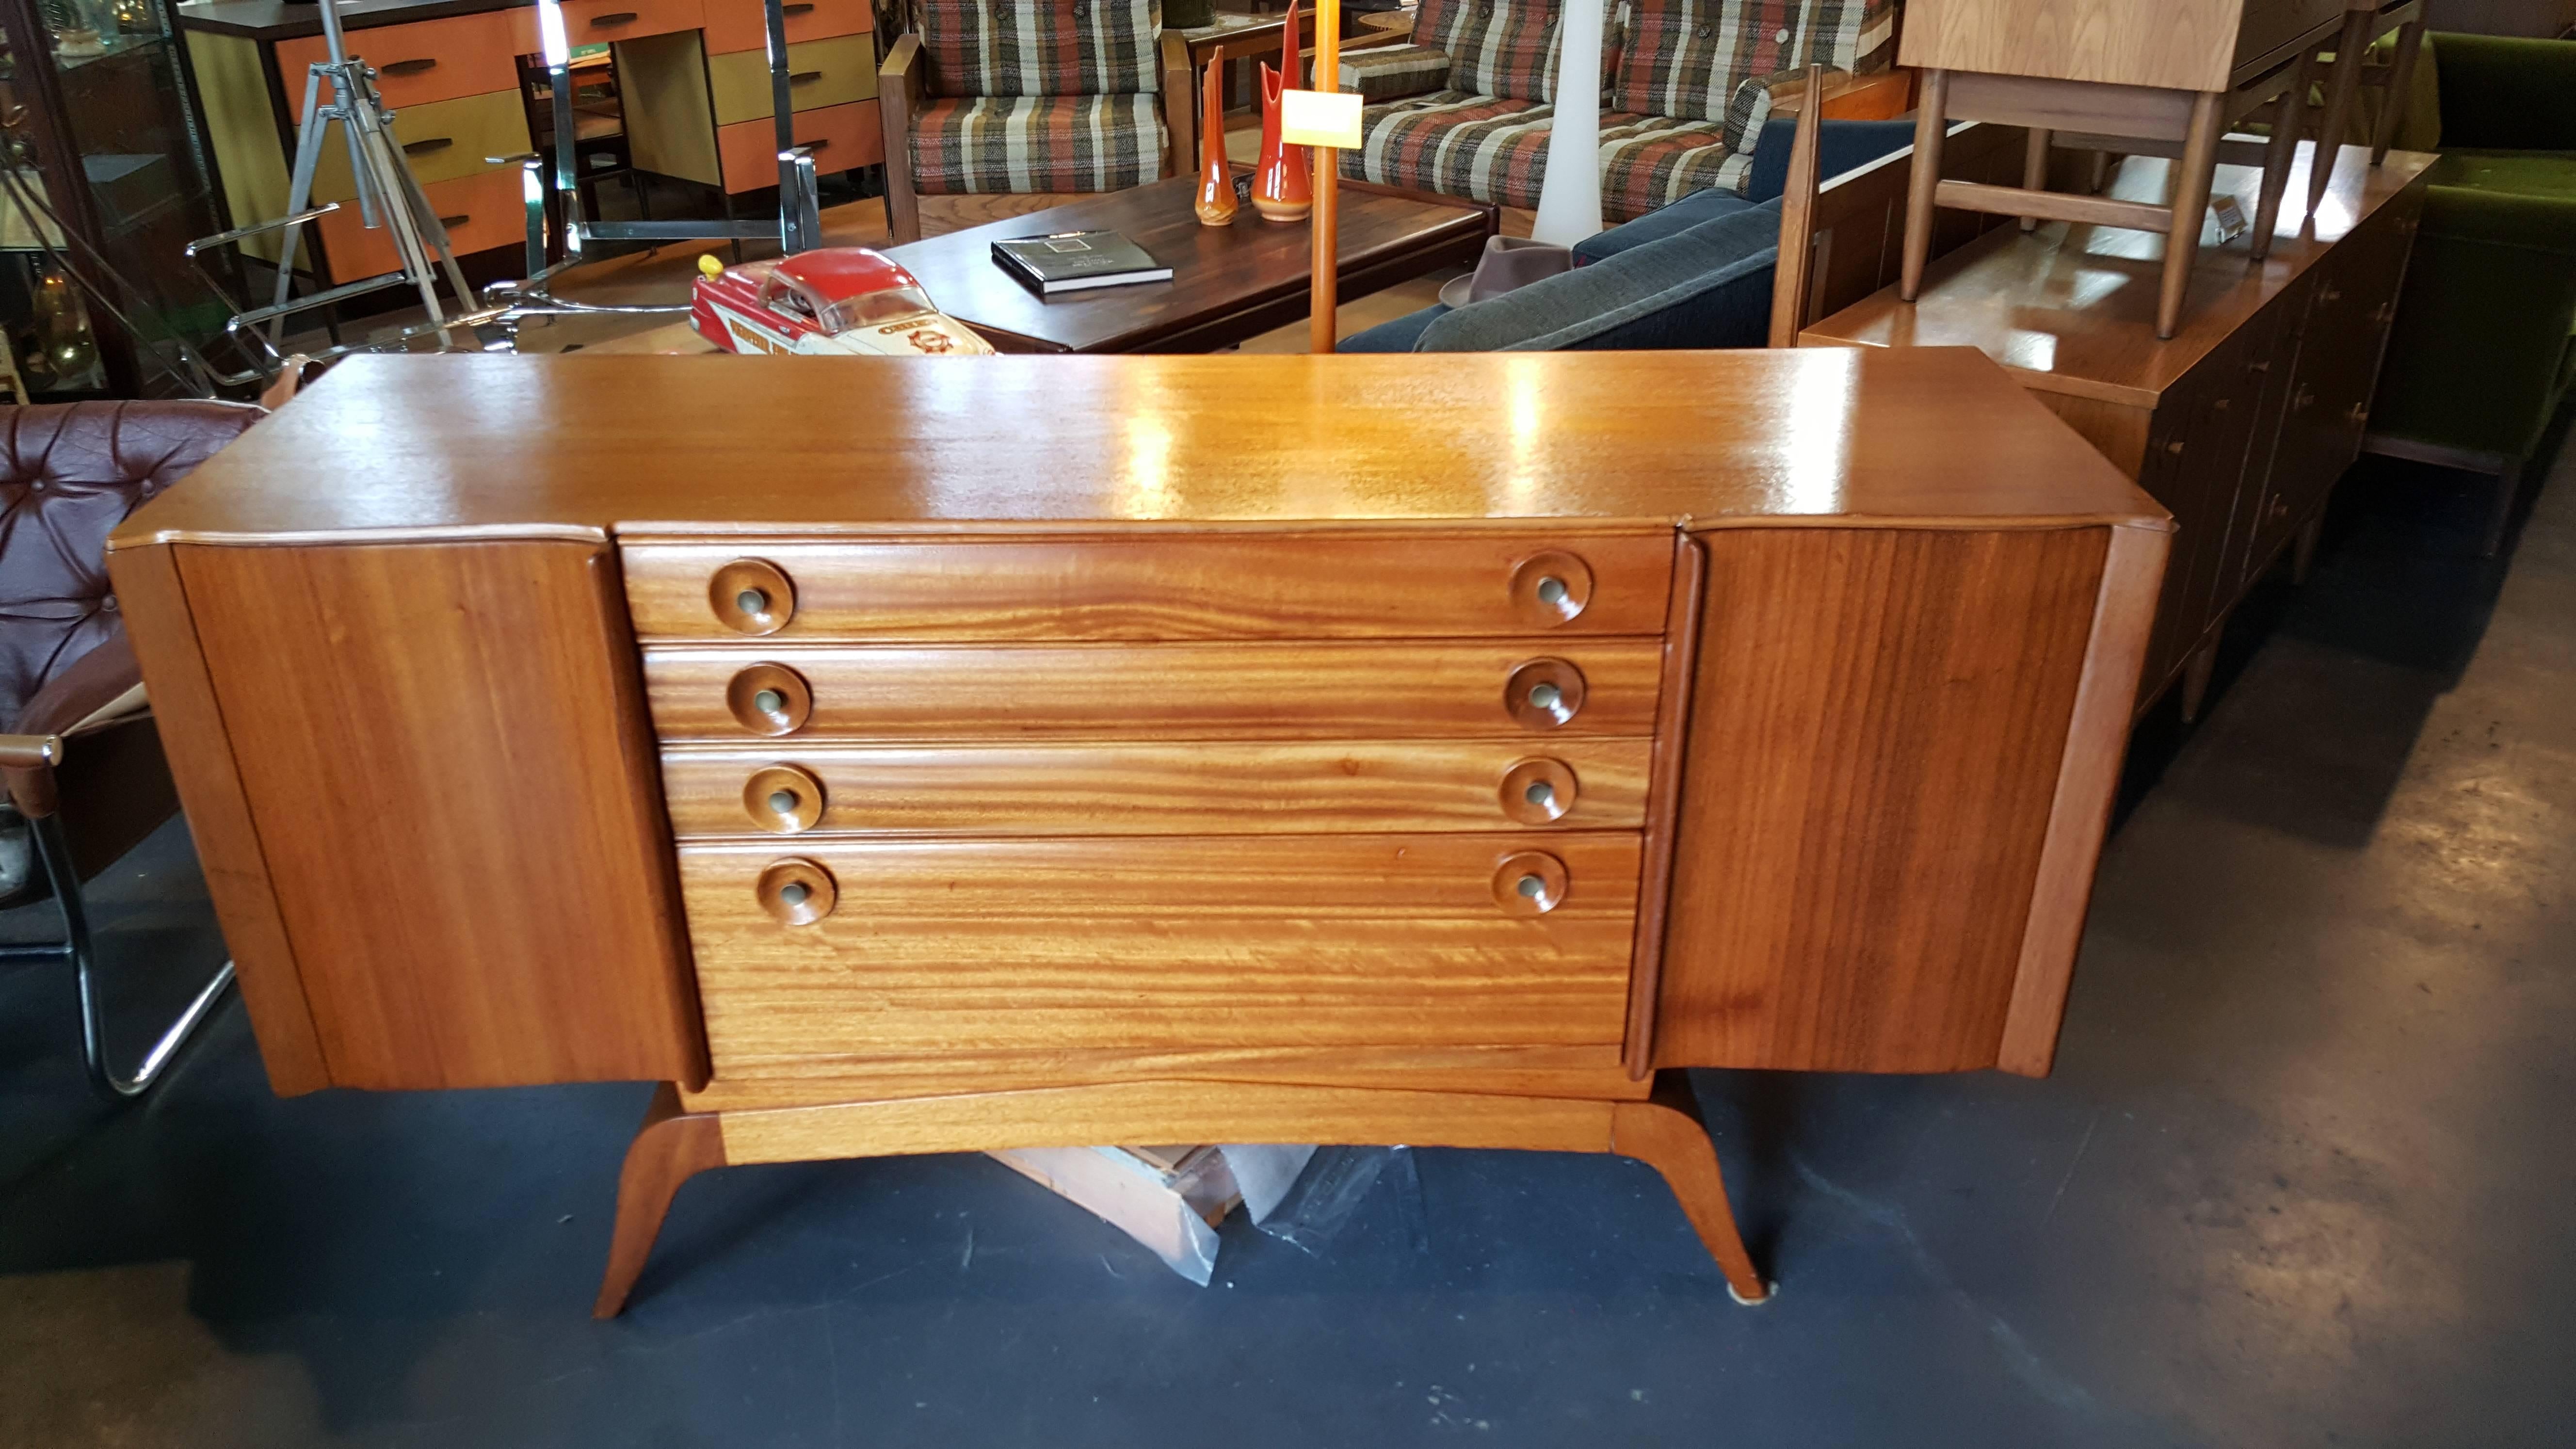 A beautiful golden mahogany credenza designed by Gilbert Rohde, circa 1942. Solid ribbon cut mahogany drawer and door fronts with a beautiful figured wood grain. Deep and rich glow to the original finish. Ample storage with drop-front bottom drawer.